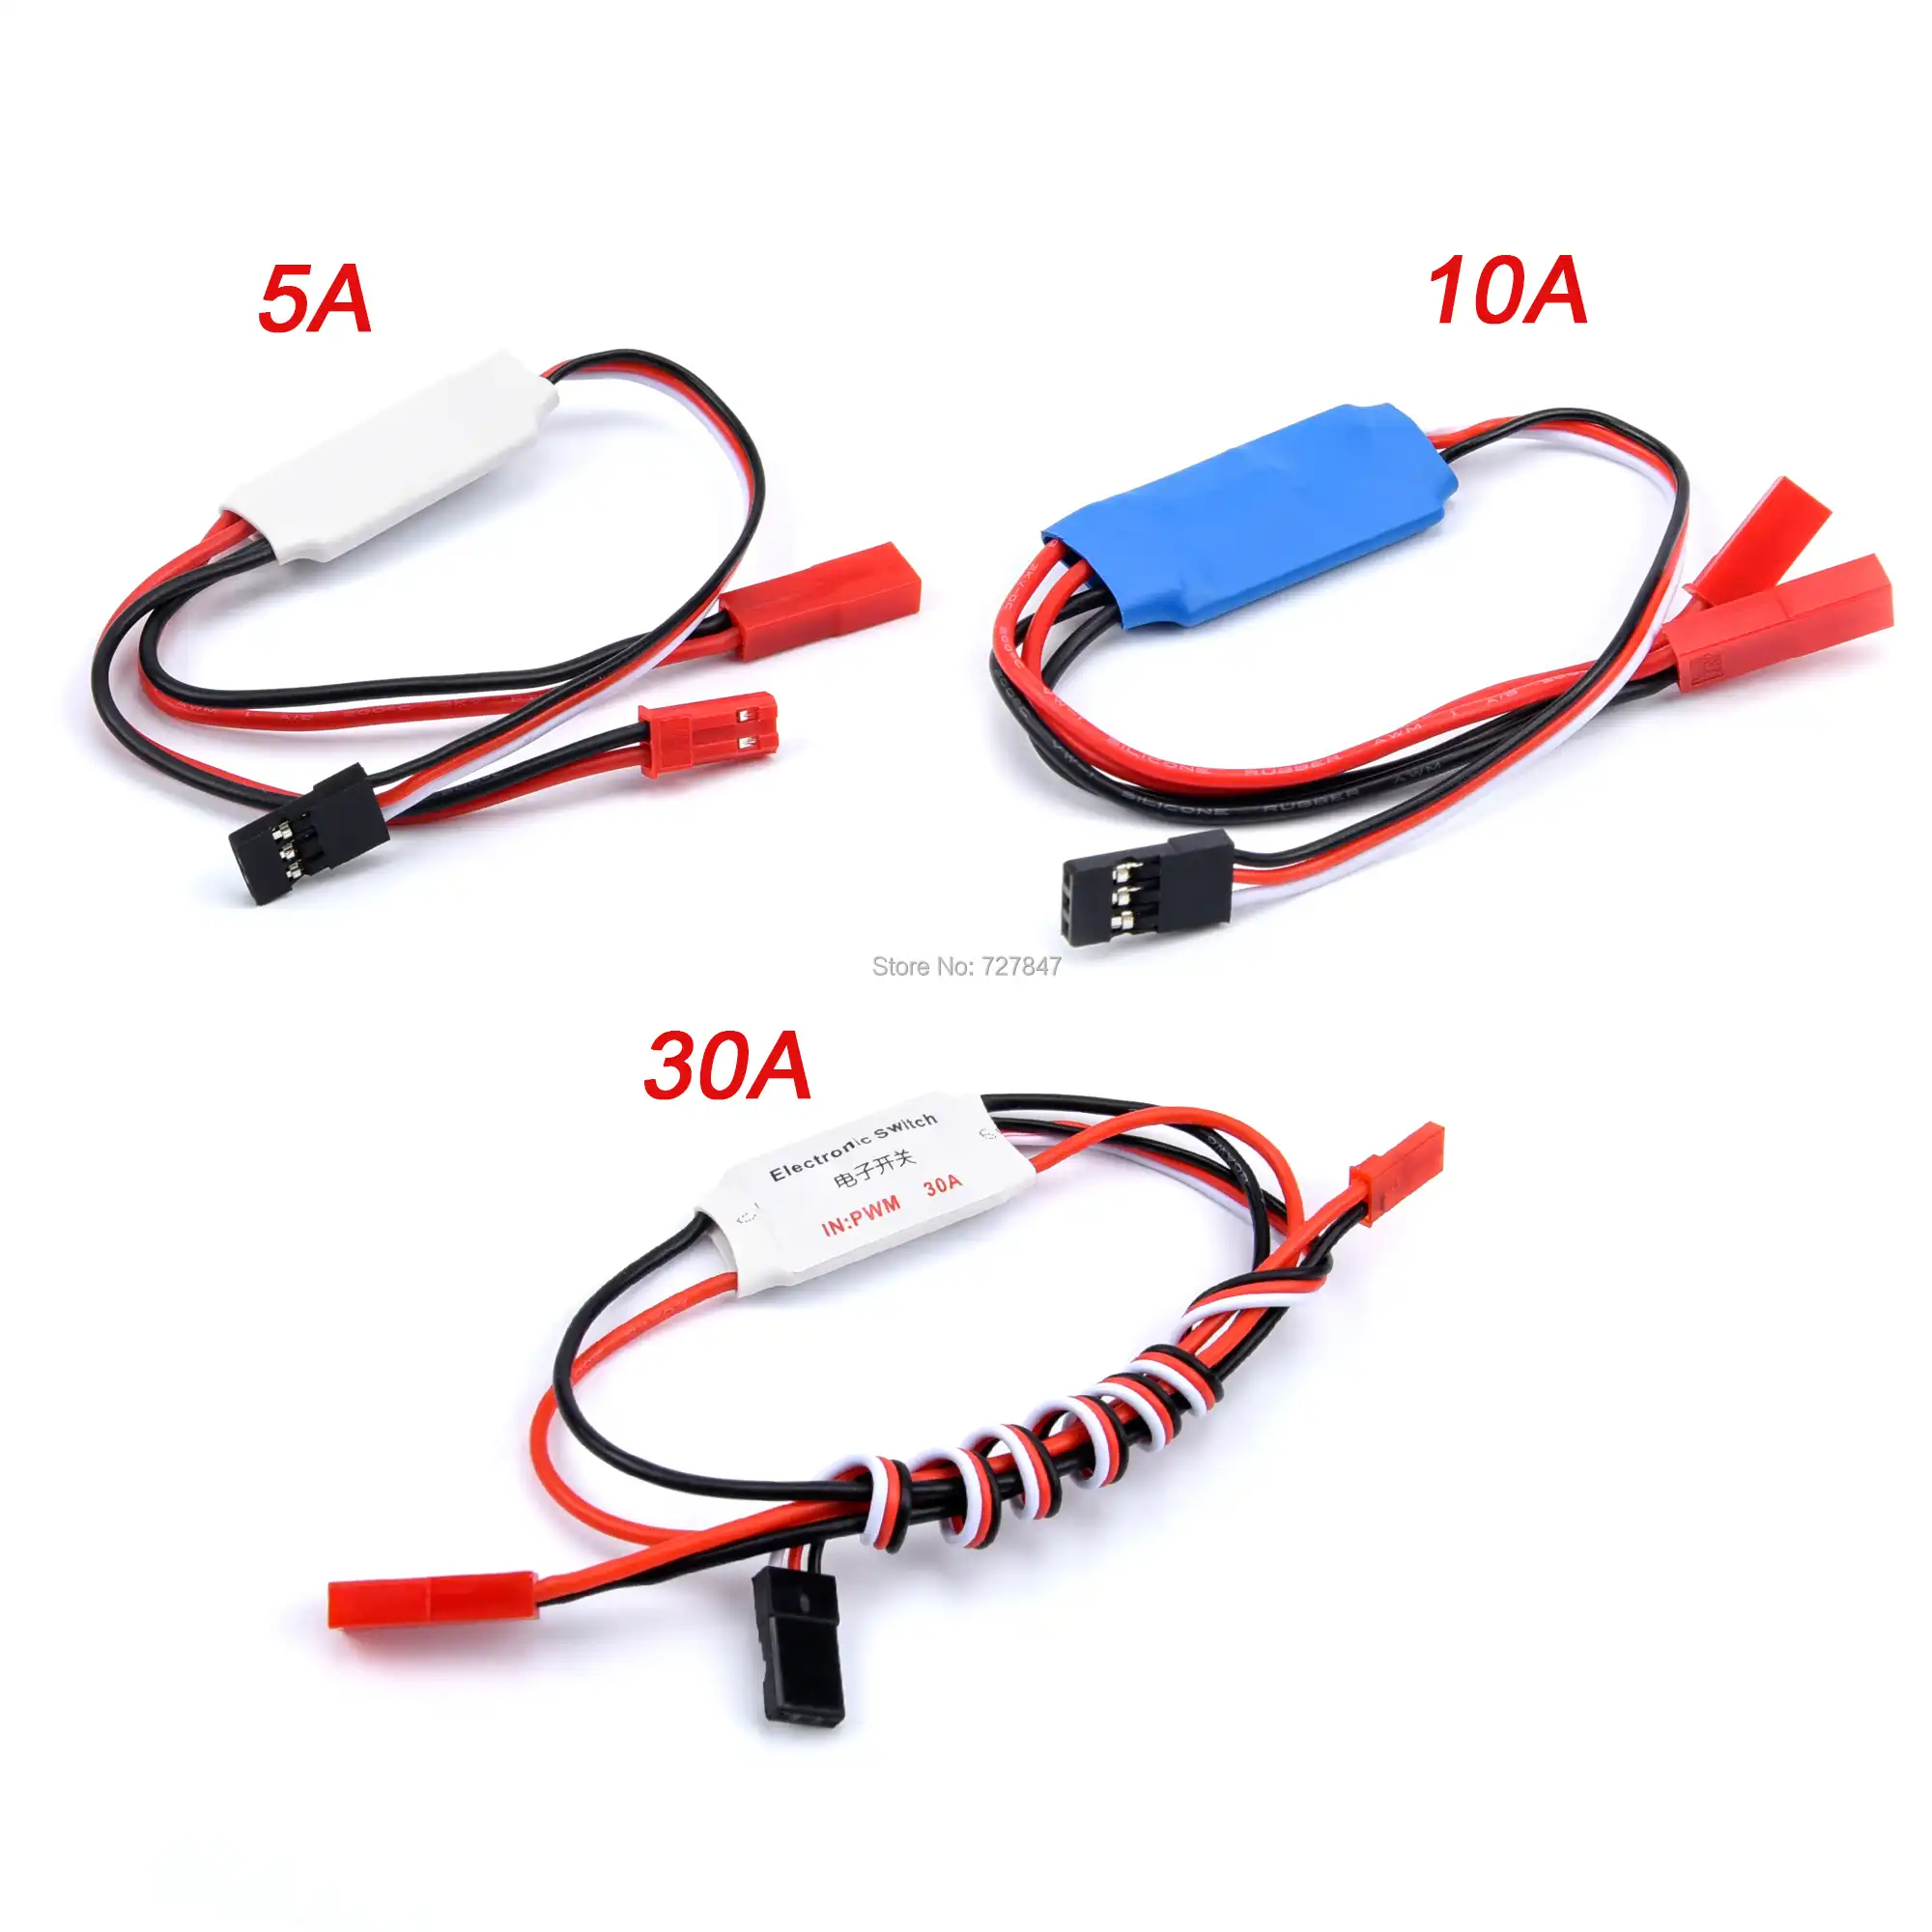 RC 30A 3.7V-27V Remote Control Electronic Switch Receiver PWM Signals UK Seller